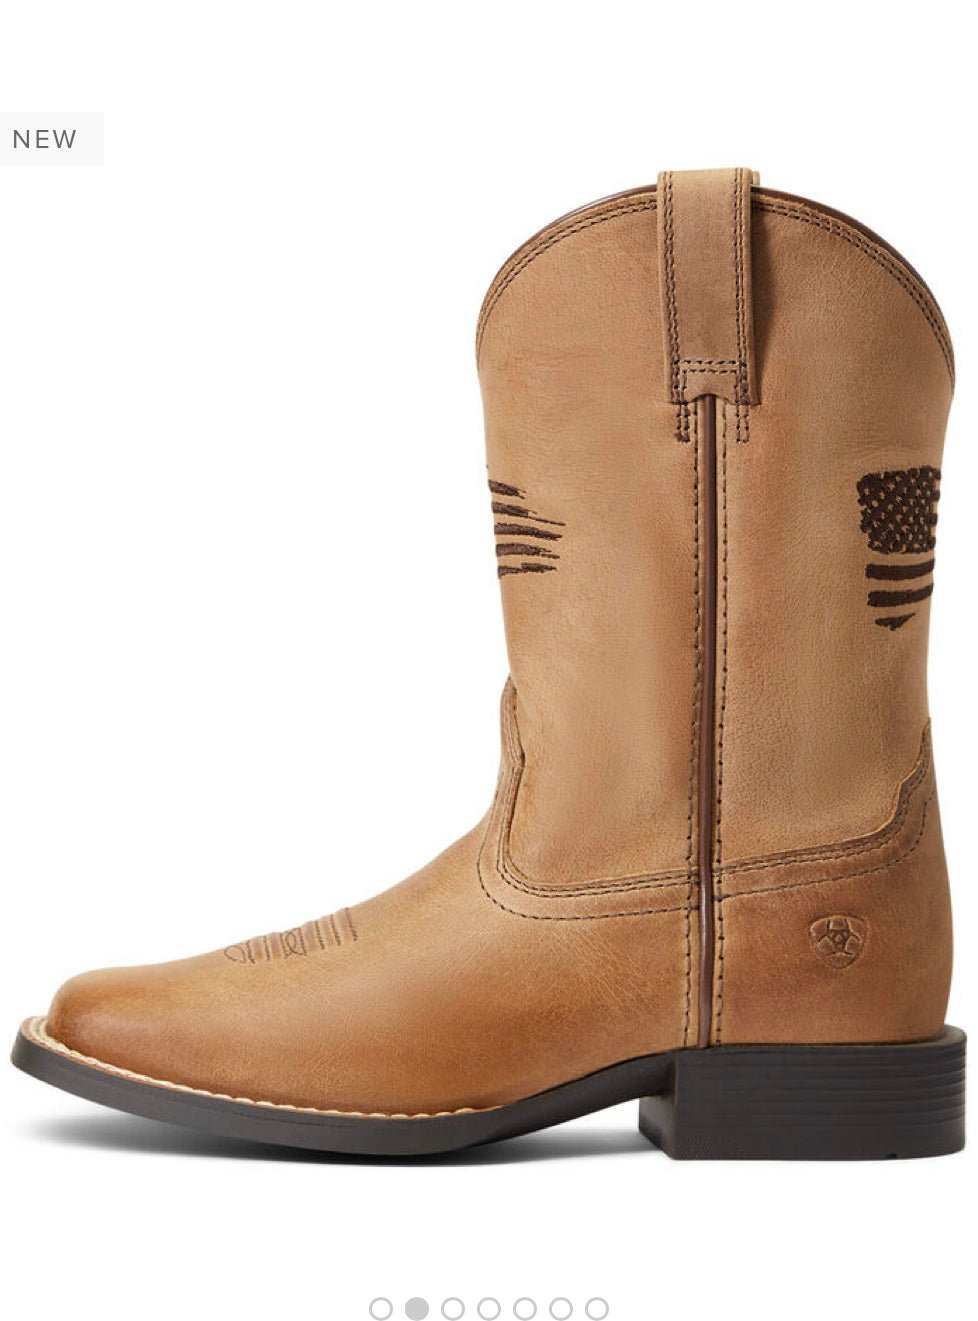 Ariat Youth Patriot 2.0 Boot - Whitt & Co. Clothing